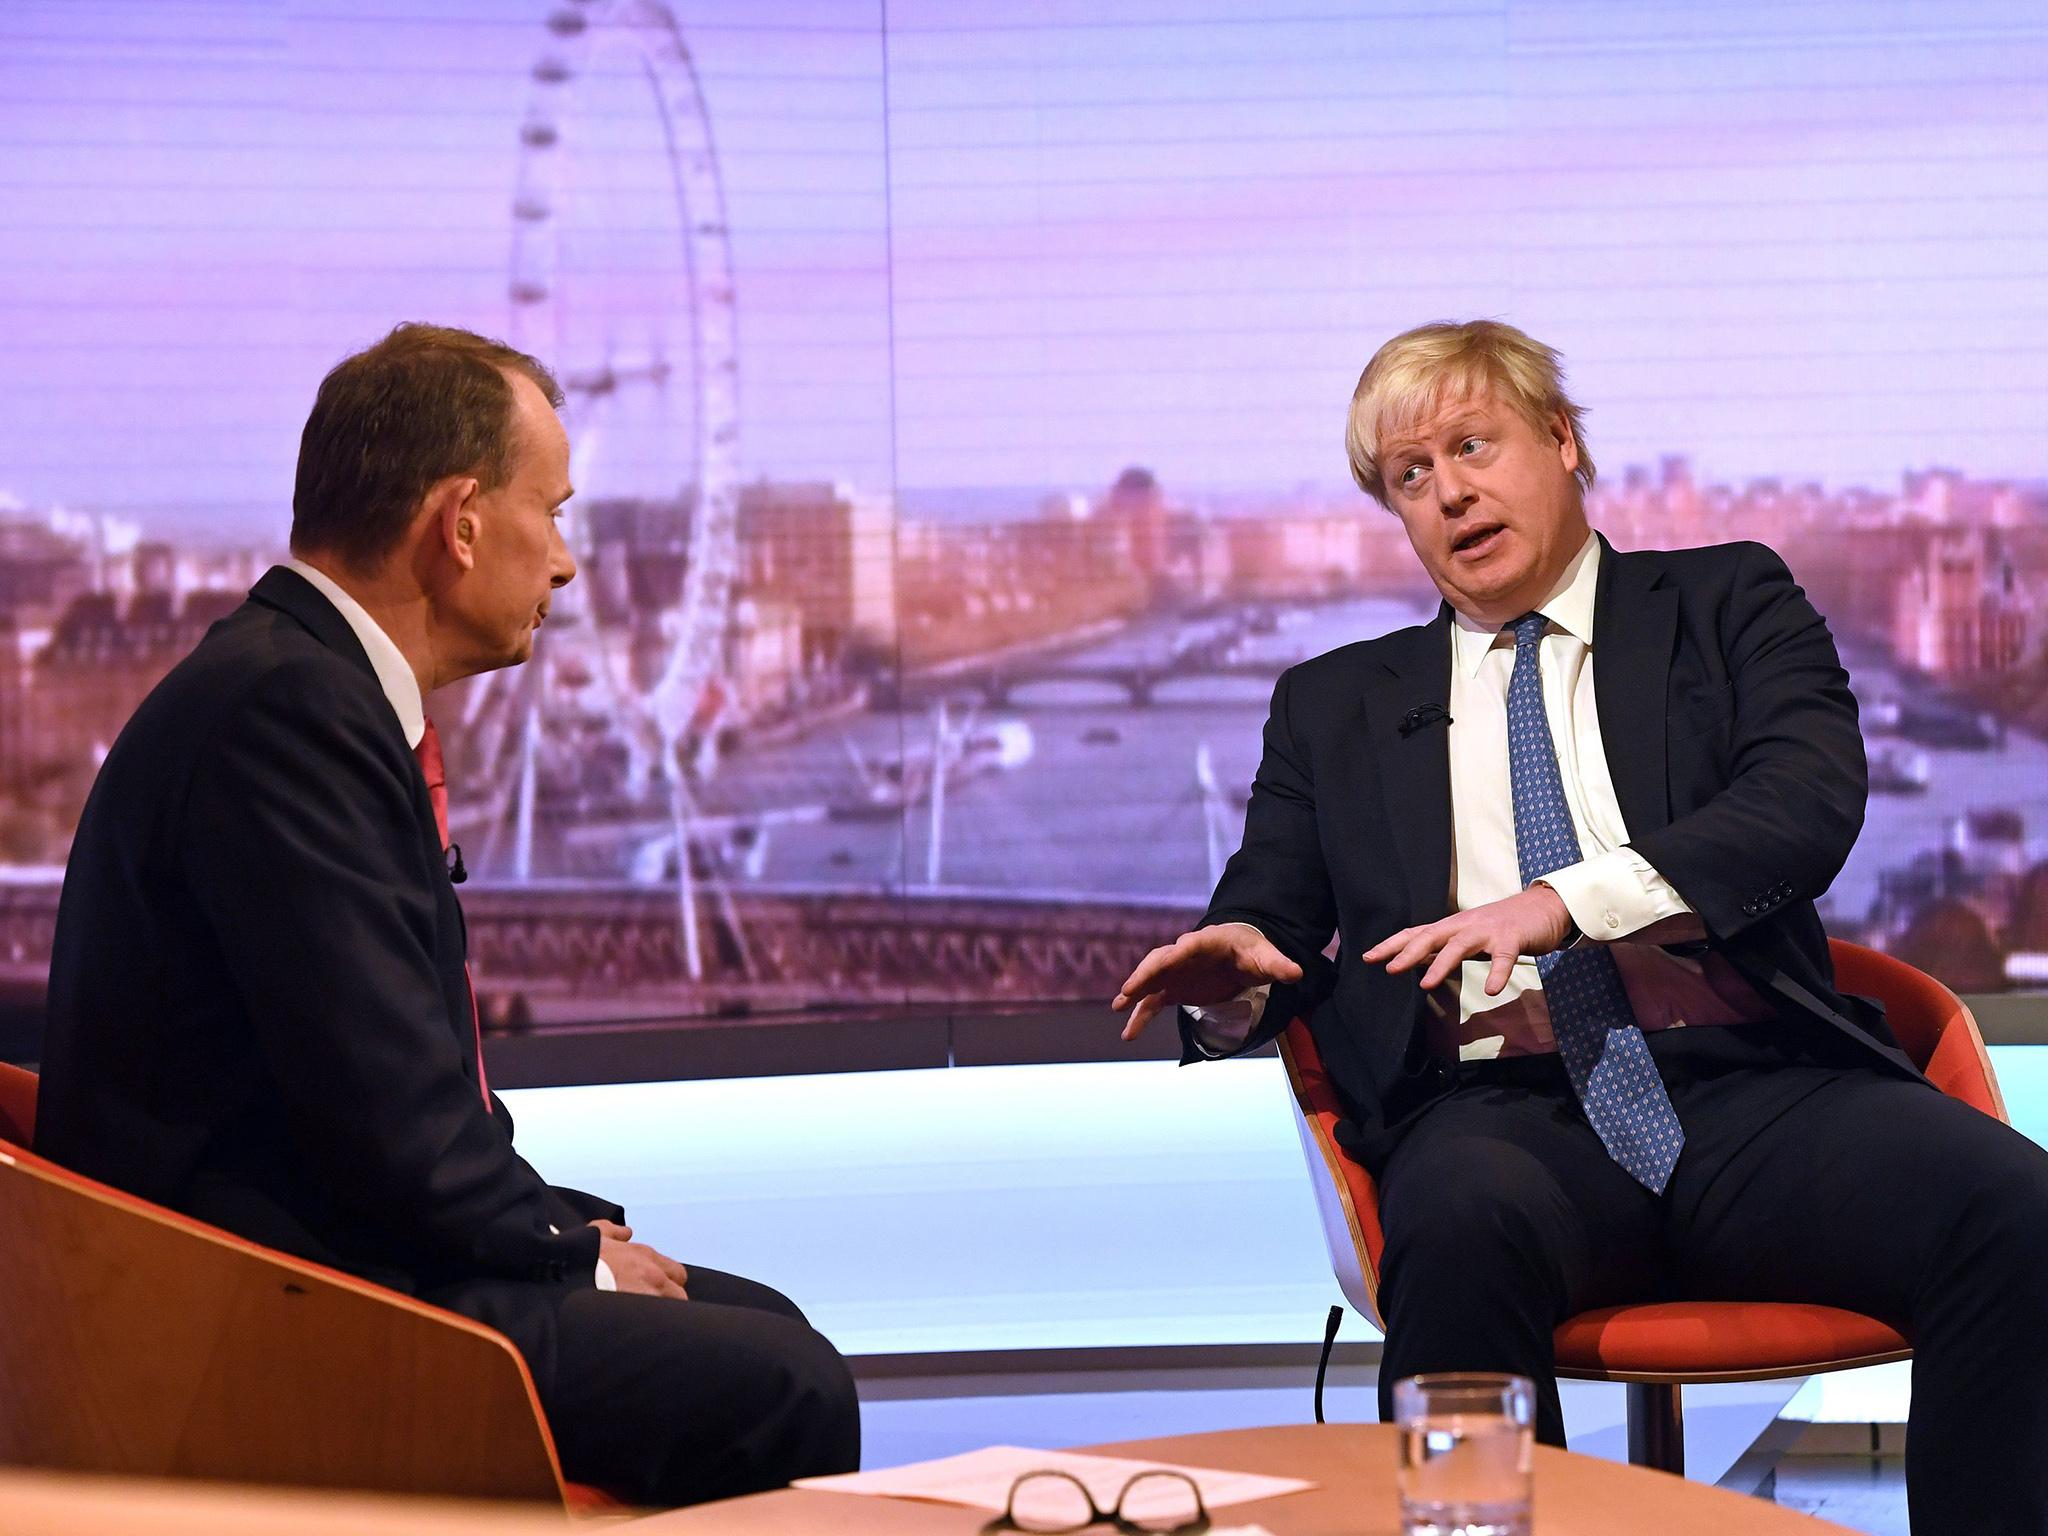 Foreign Secretary Boris Johnson struggled to find the right words to defend arms sales to Saudi Arabia on the BBC's 'Andrew Marr Show'